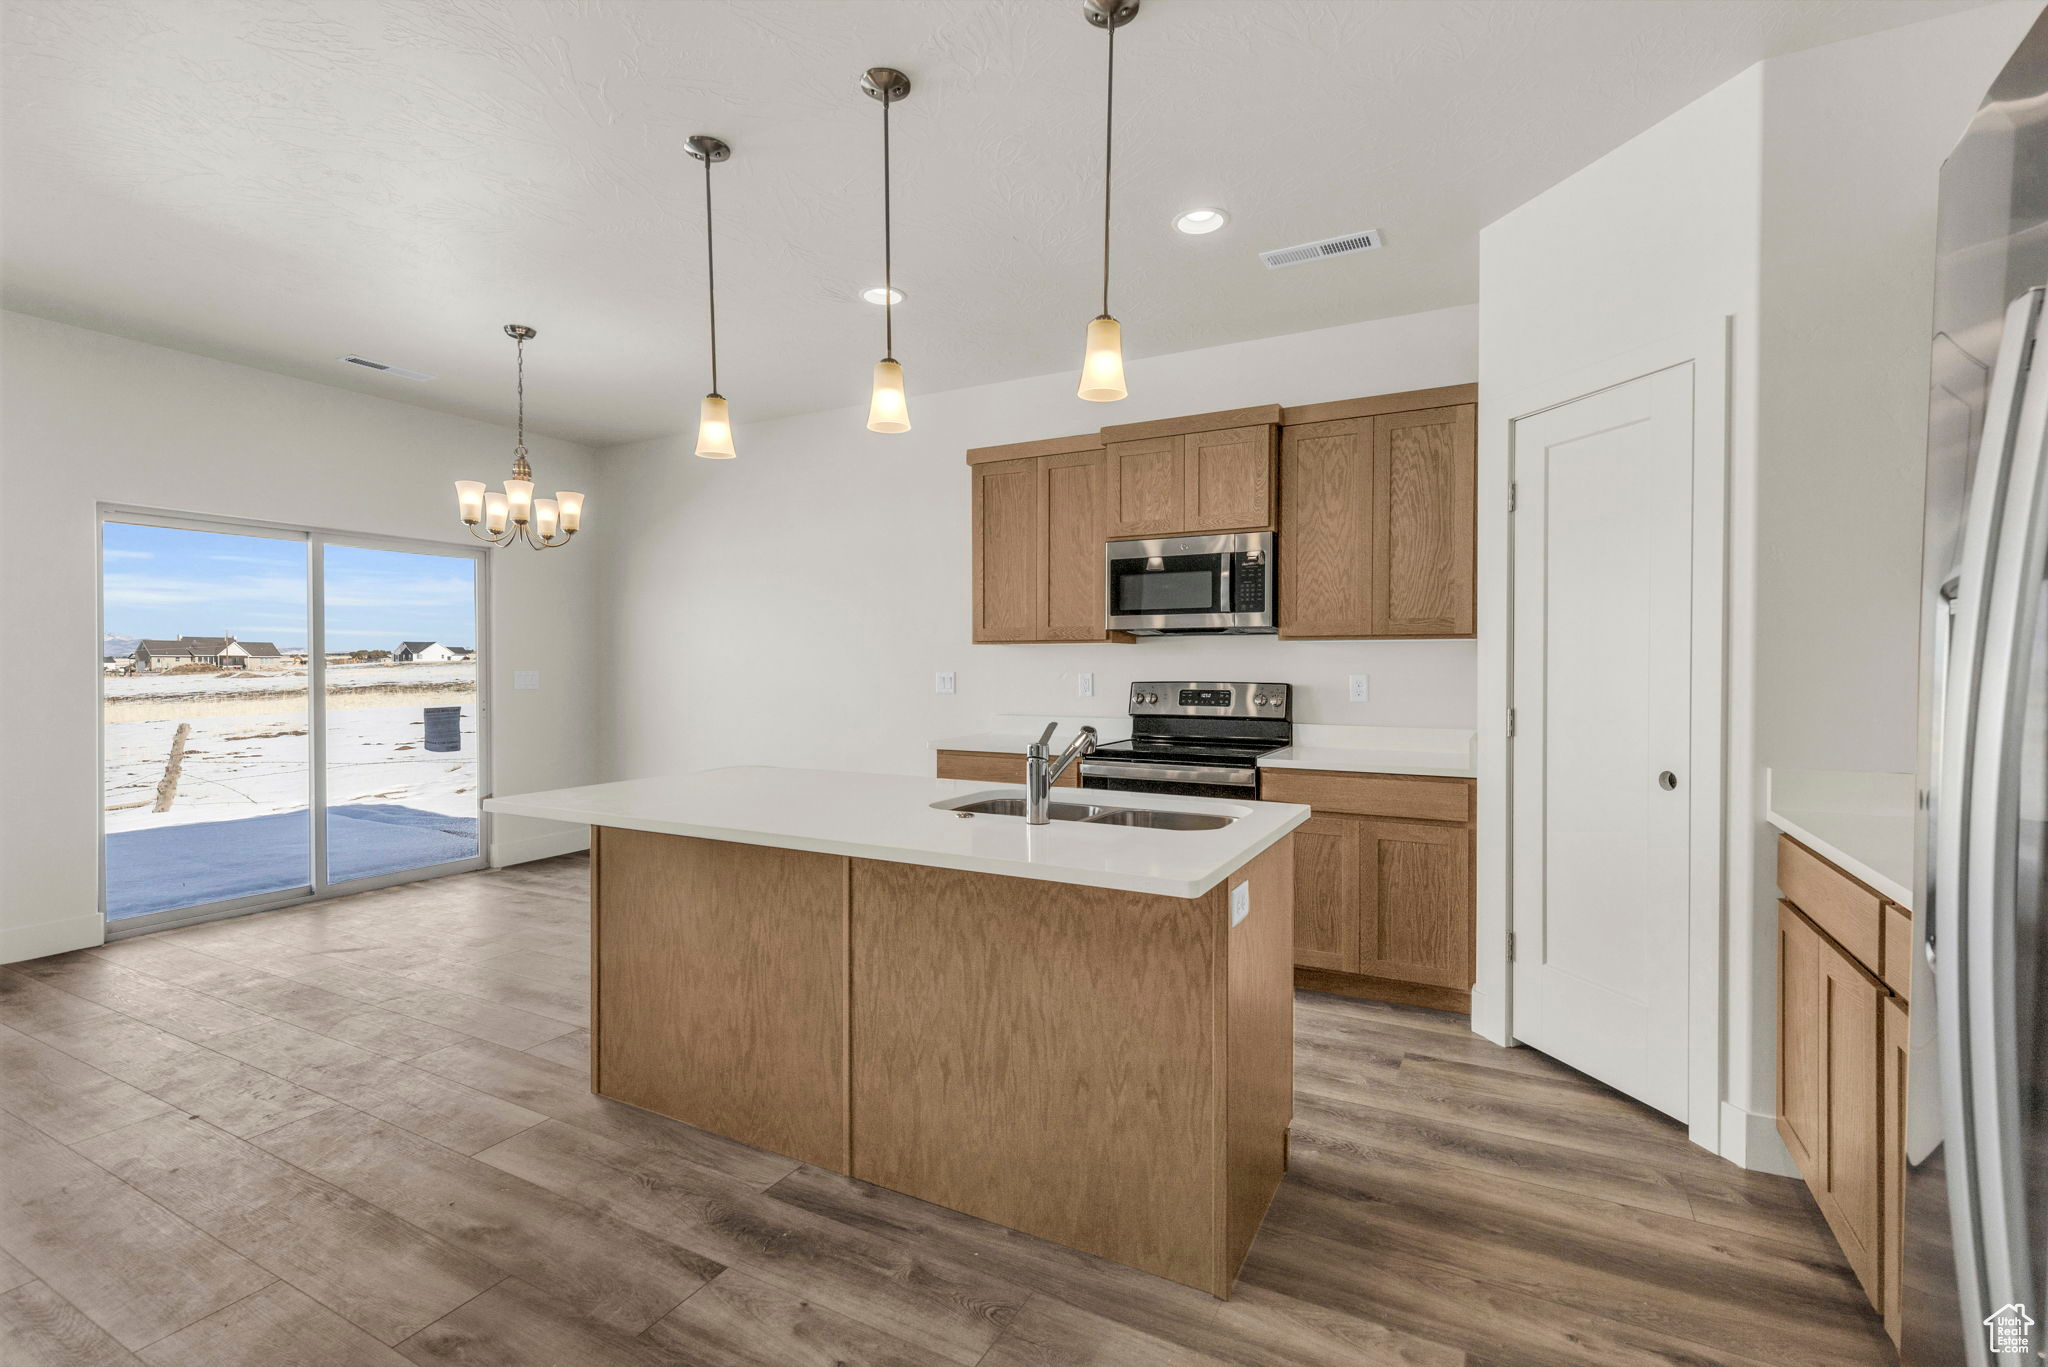 Kitchen featuring hanging light fixtures, light hardwood / wood-style floors, an island with sink, and stainless steel appliances